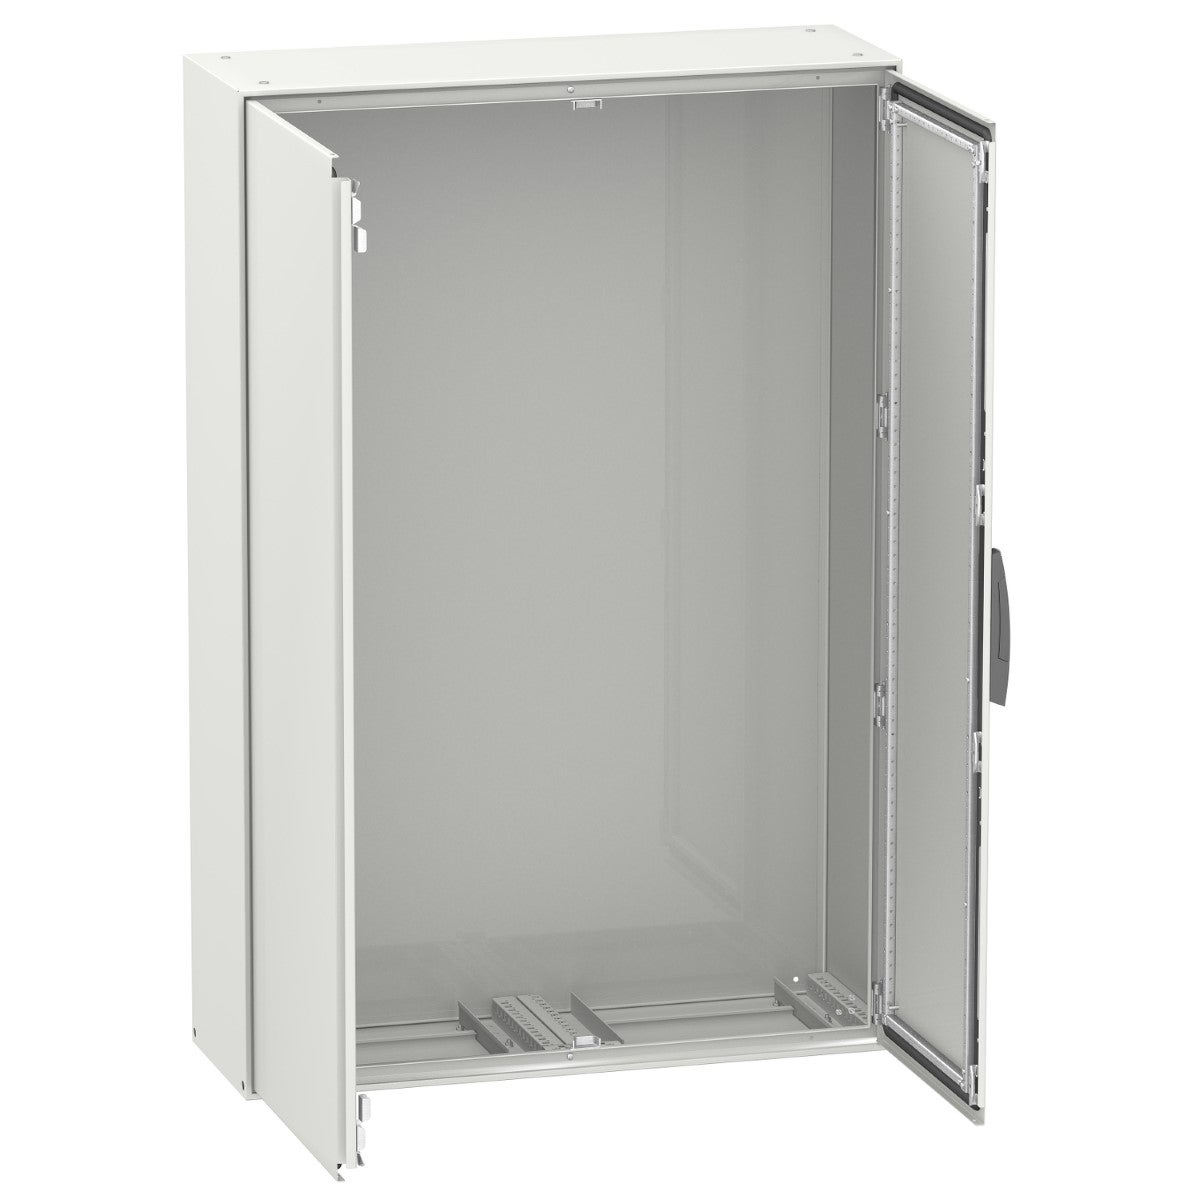 Spacial SM compact enclosure without mounting plate - 1800x1000x400 mm